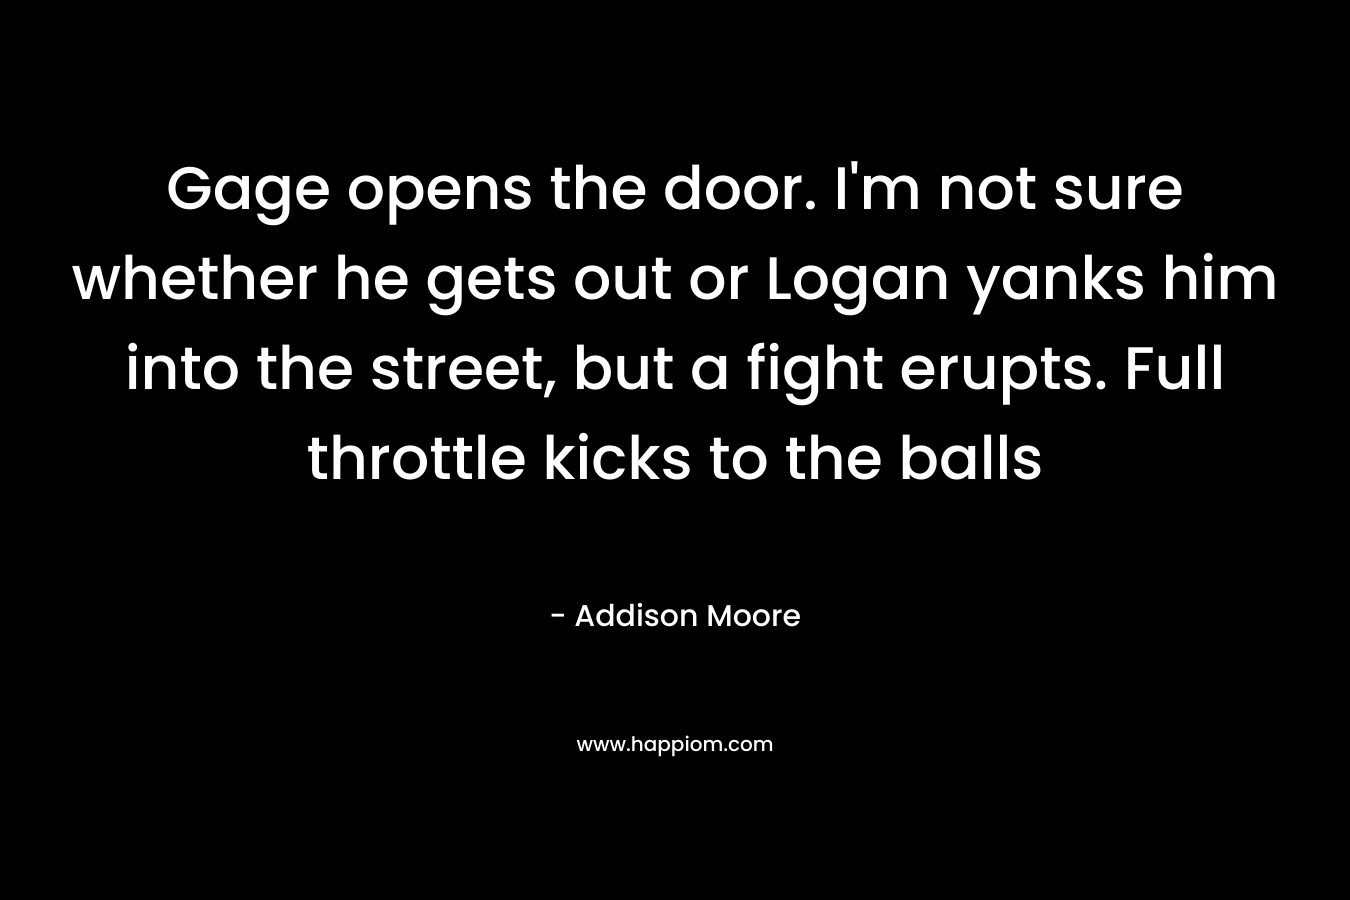 Gage opens the door. I’m not sure whether he gets out or Logan yanks him into the street, but a fight erupts. Full throttle kicks to the balls – Addison Moore